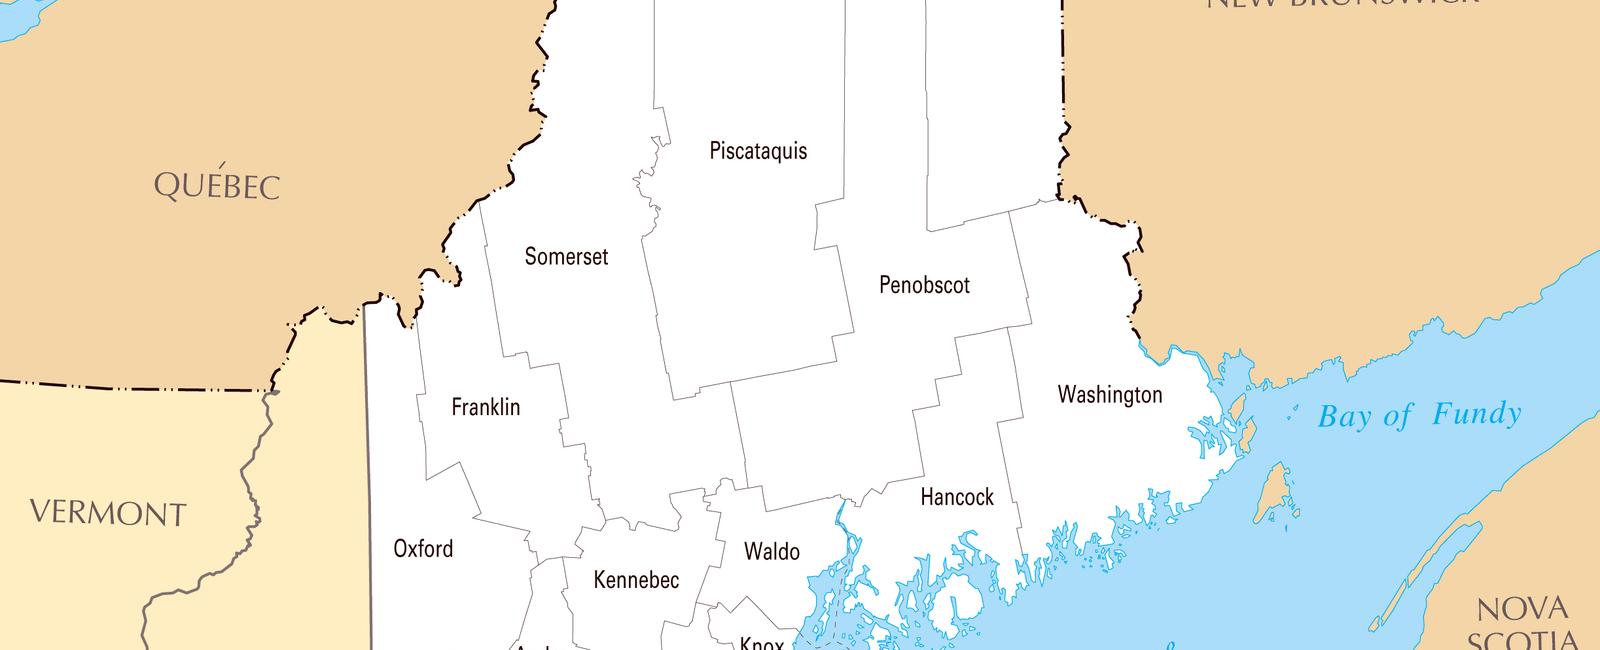 Maine is the only state that has borders with only one other state